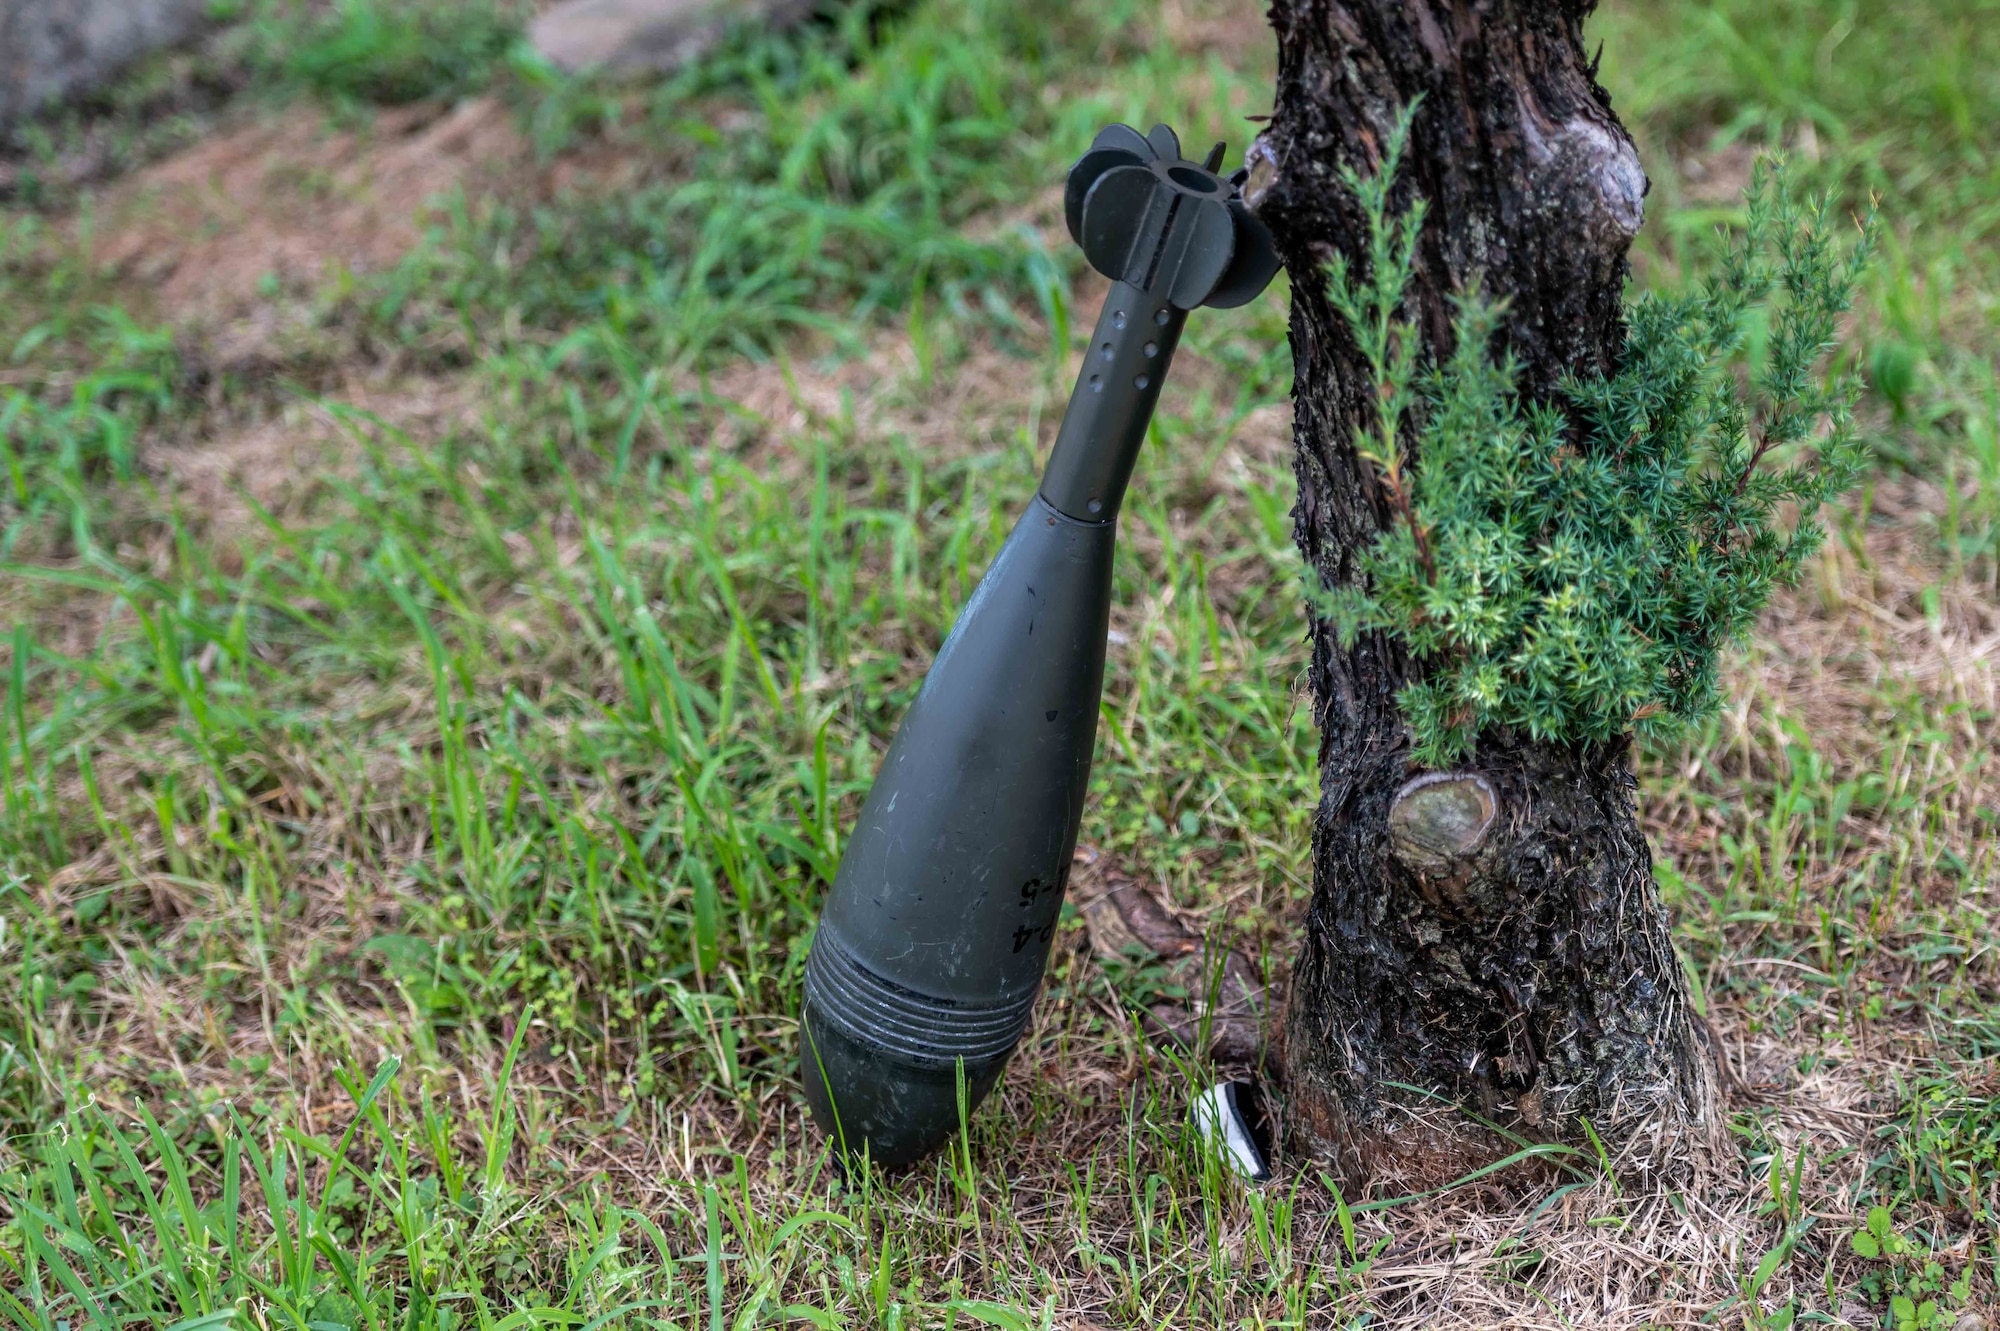 A simulated unexploded ordnance (UXO) leans against a tree as part of a base-wide training event at Osan Air Base